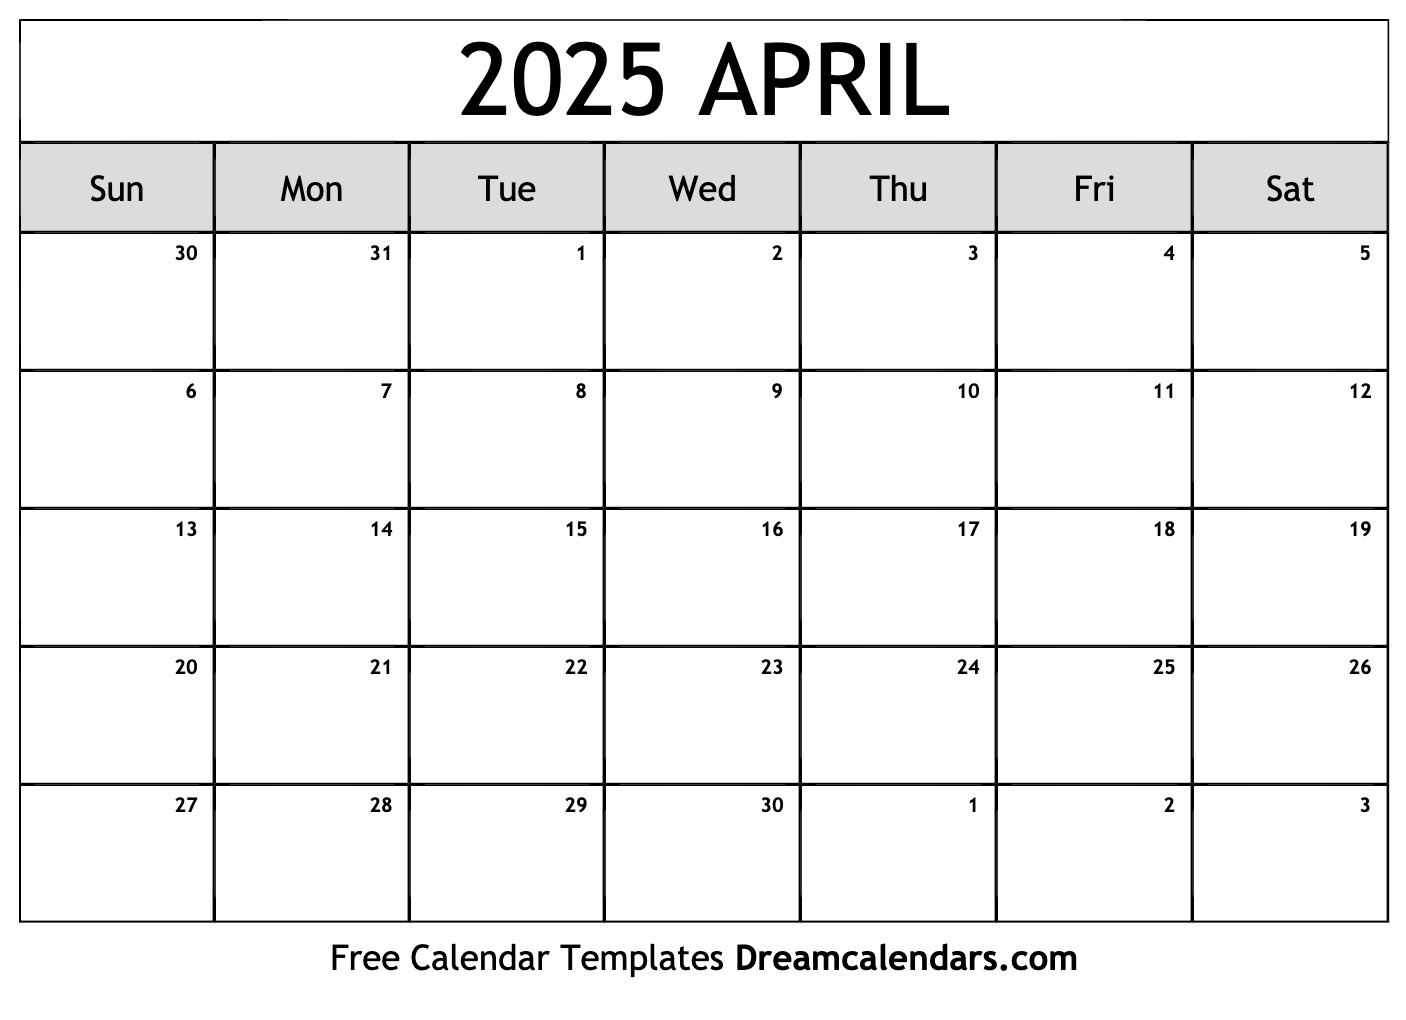 April 2025 Calendar - Free Printable with Holidays and Observances